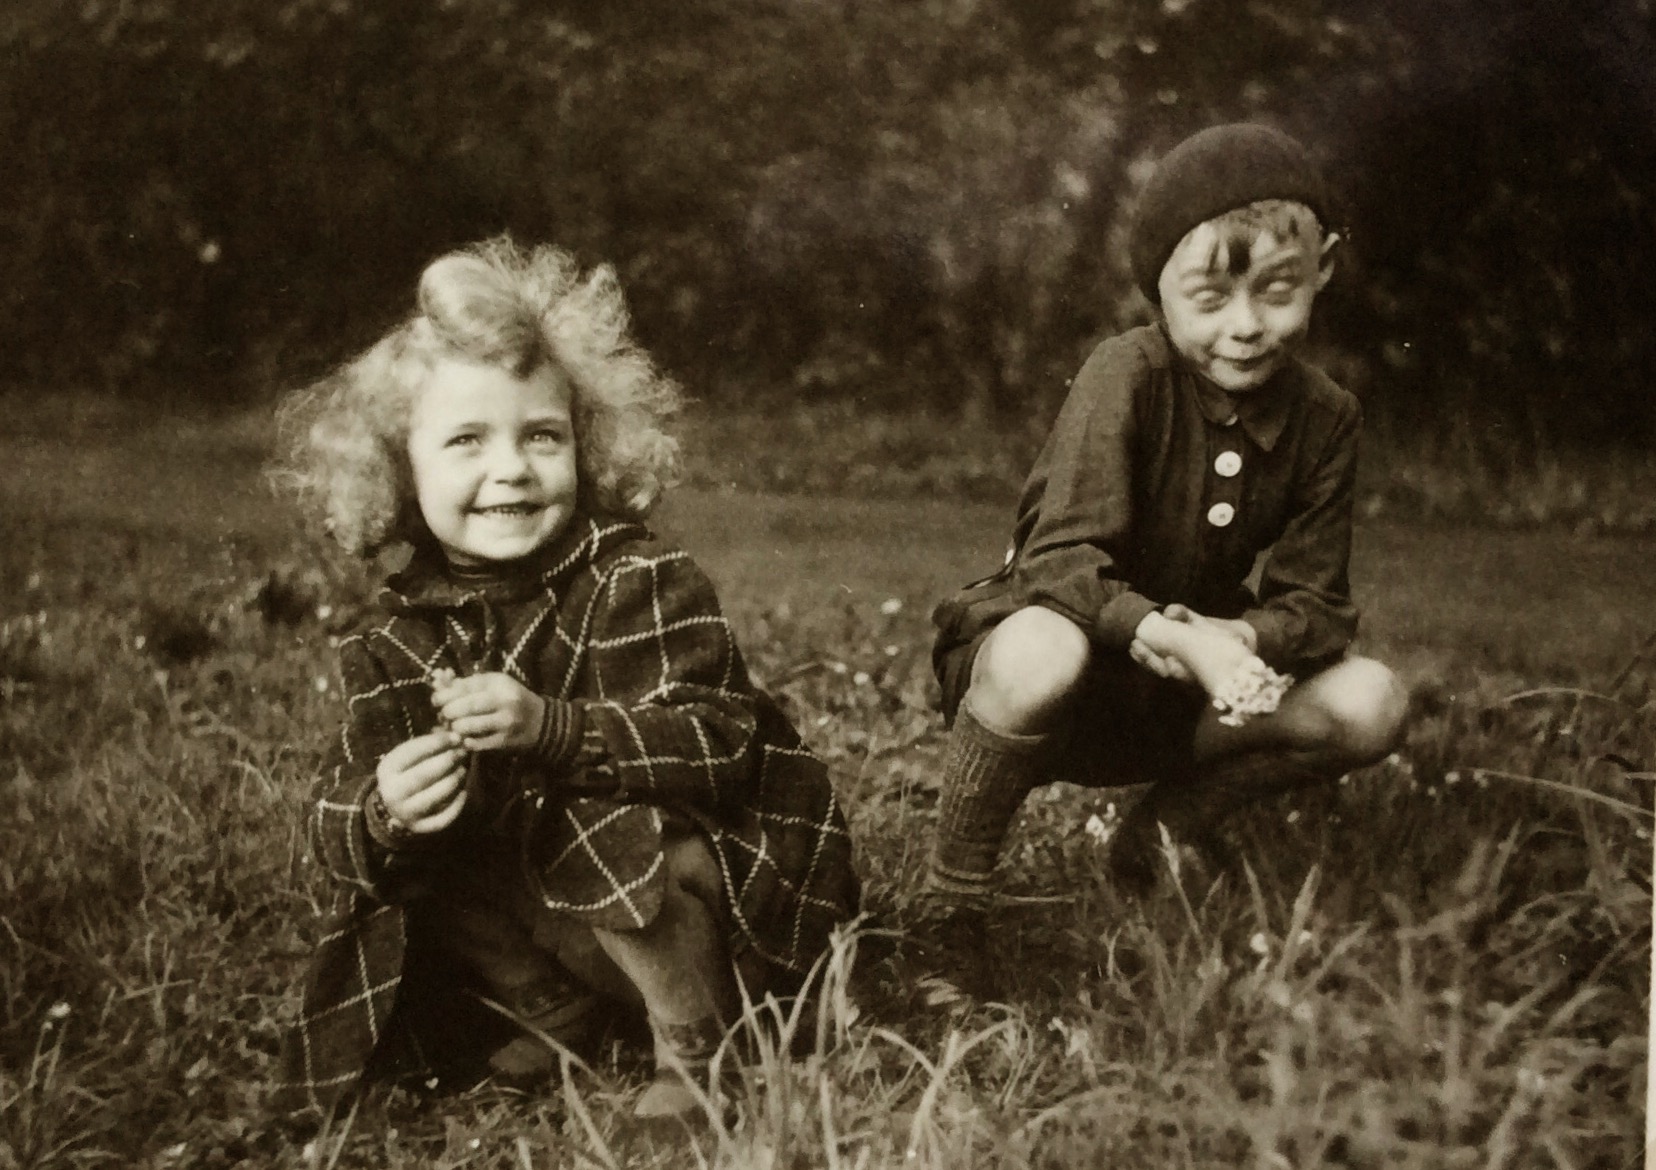 MY OLDER BROTHER AND I…BRAUNSCHWEIG, GERMANY, 1943